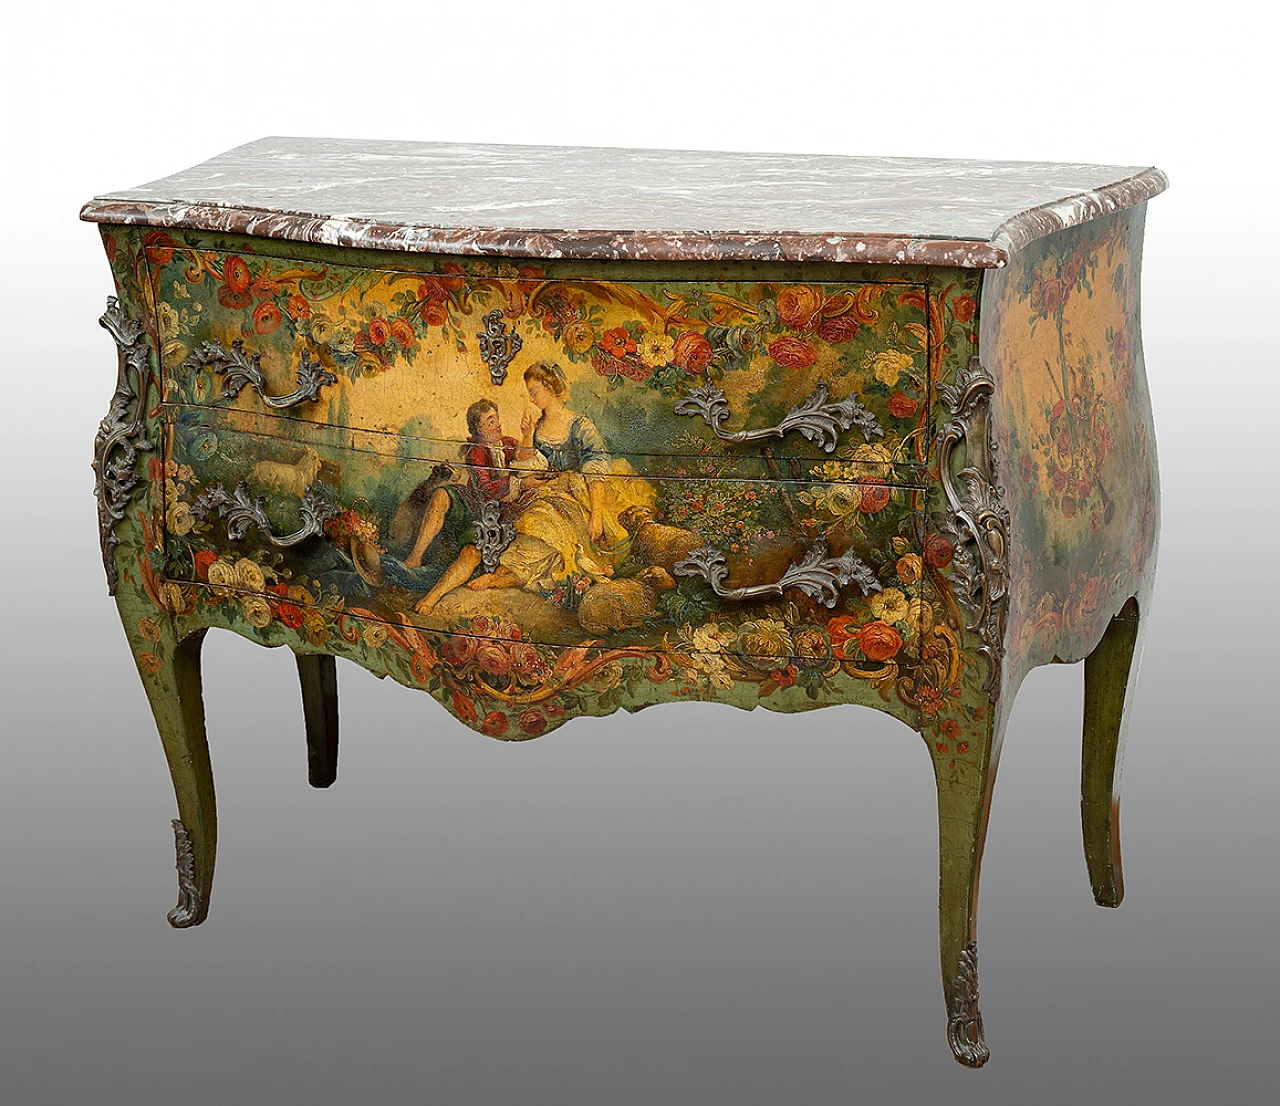 Napoleon III lacquered wood commode with gallant scene, 19th century 1